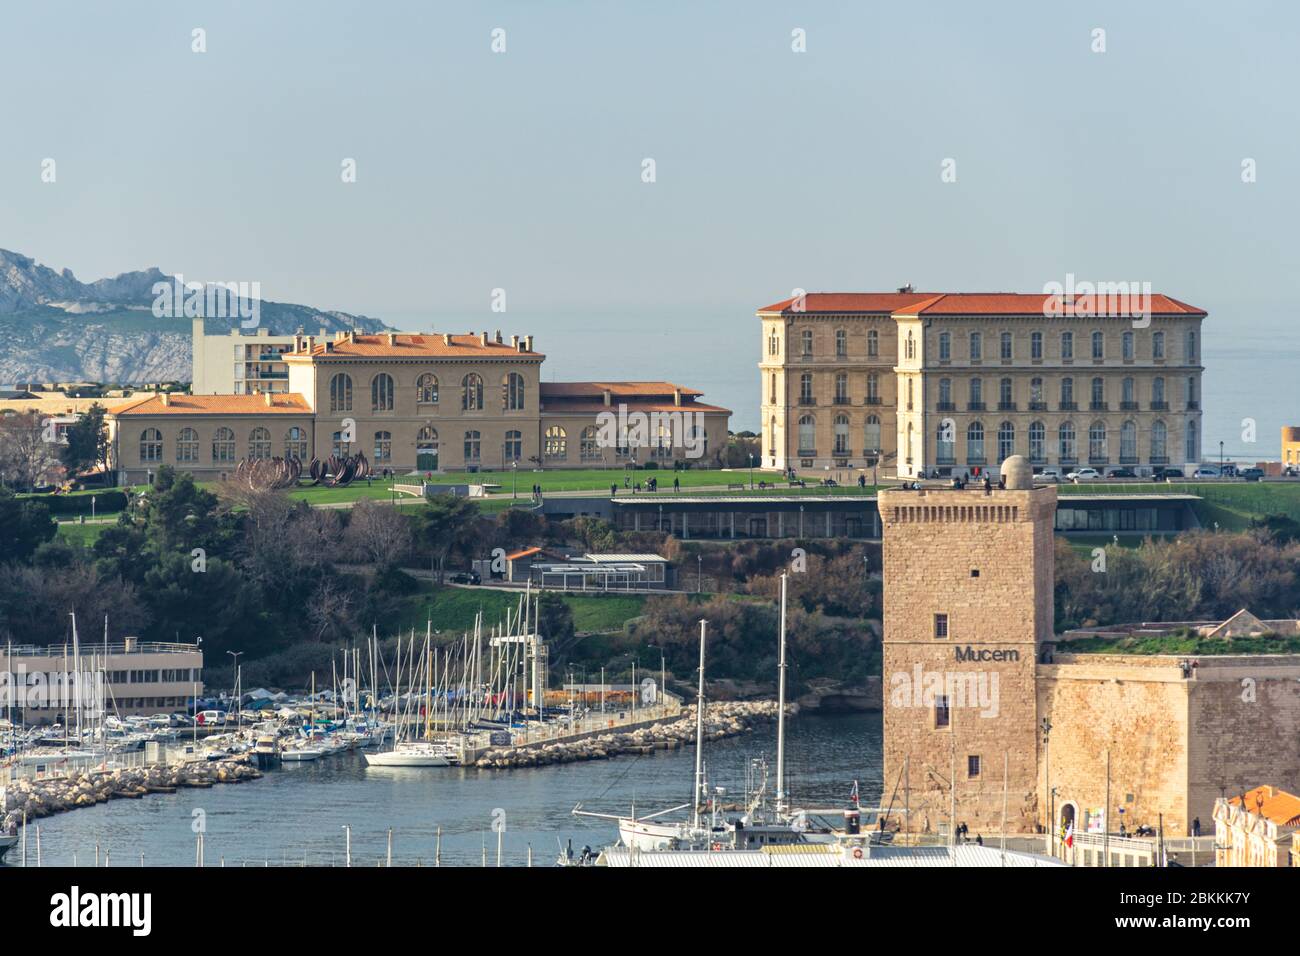 Two of the most famous historic landmarks of Marseille Old Port: the Palais du Pharo and the Fort Saint-Jean Stock Photo